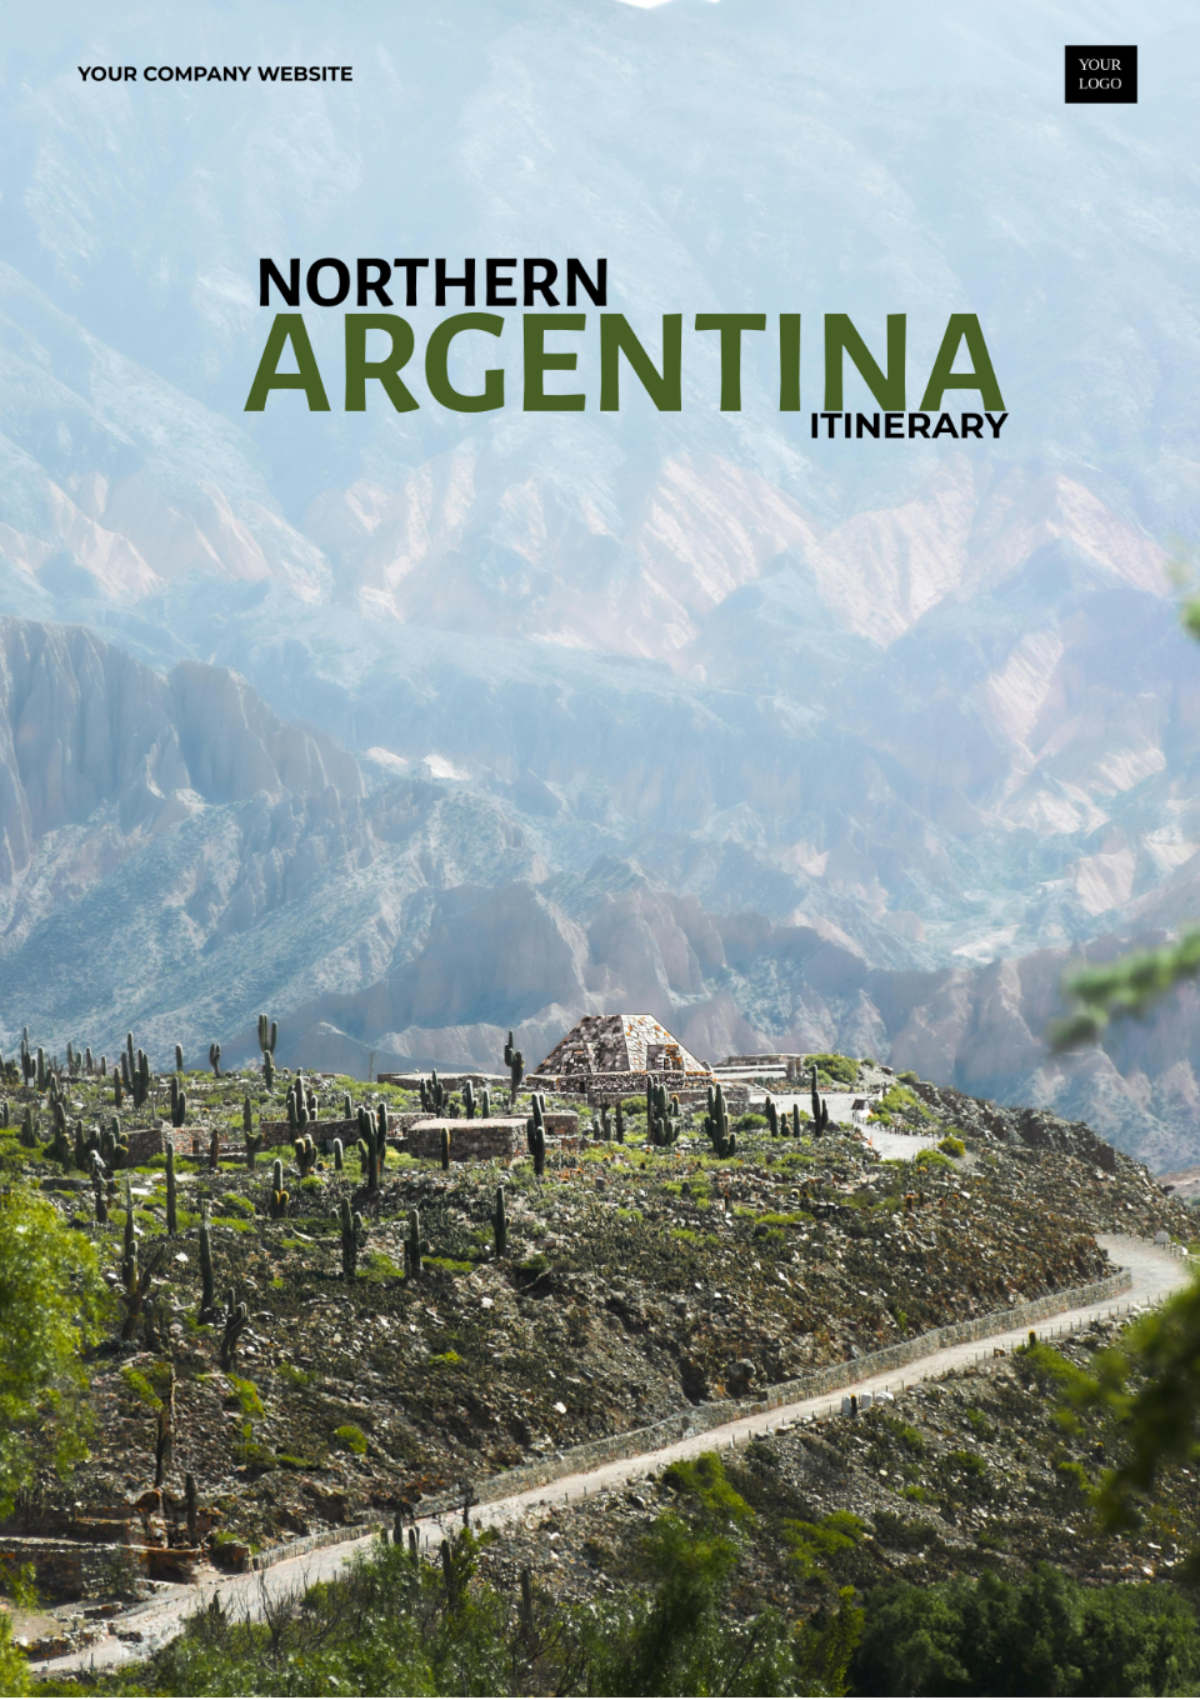 Northern Argentina Itinerary Template